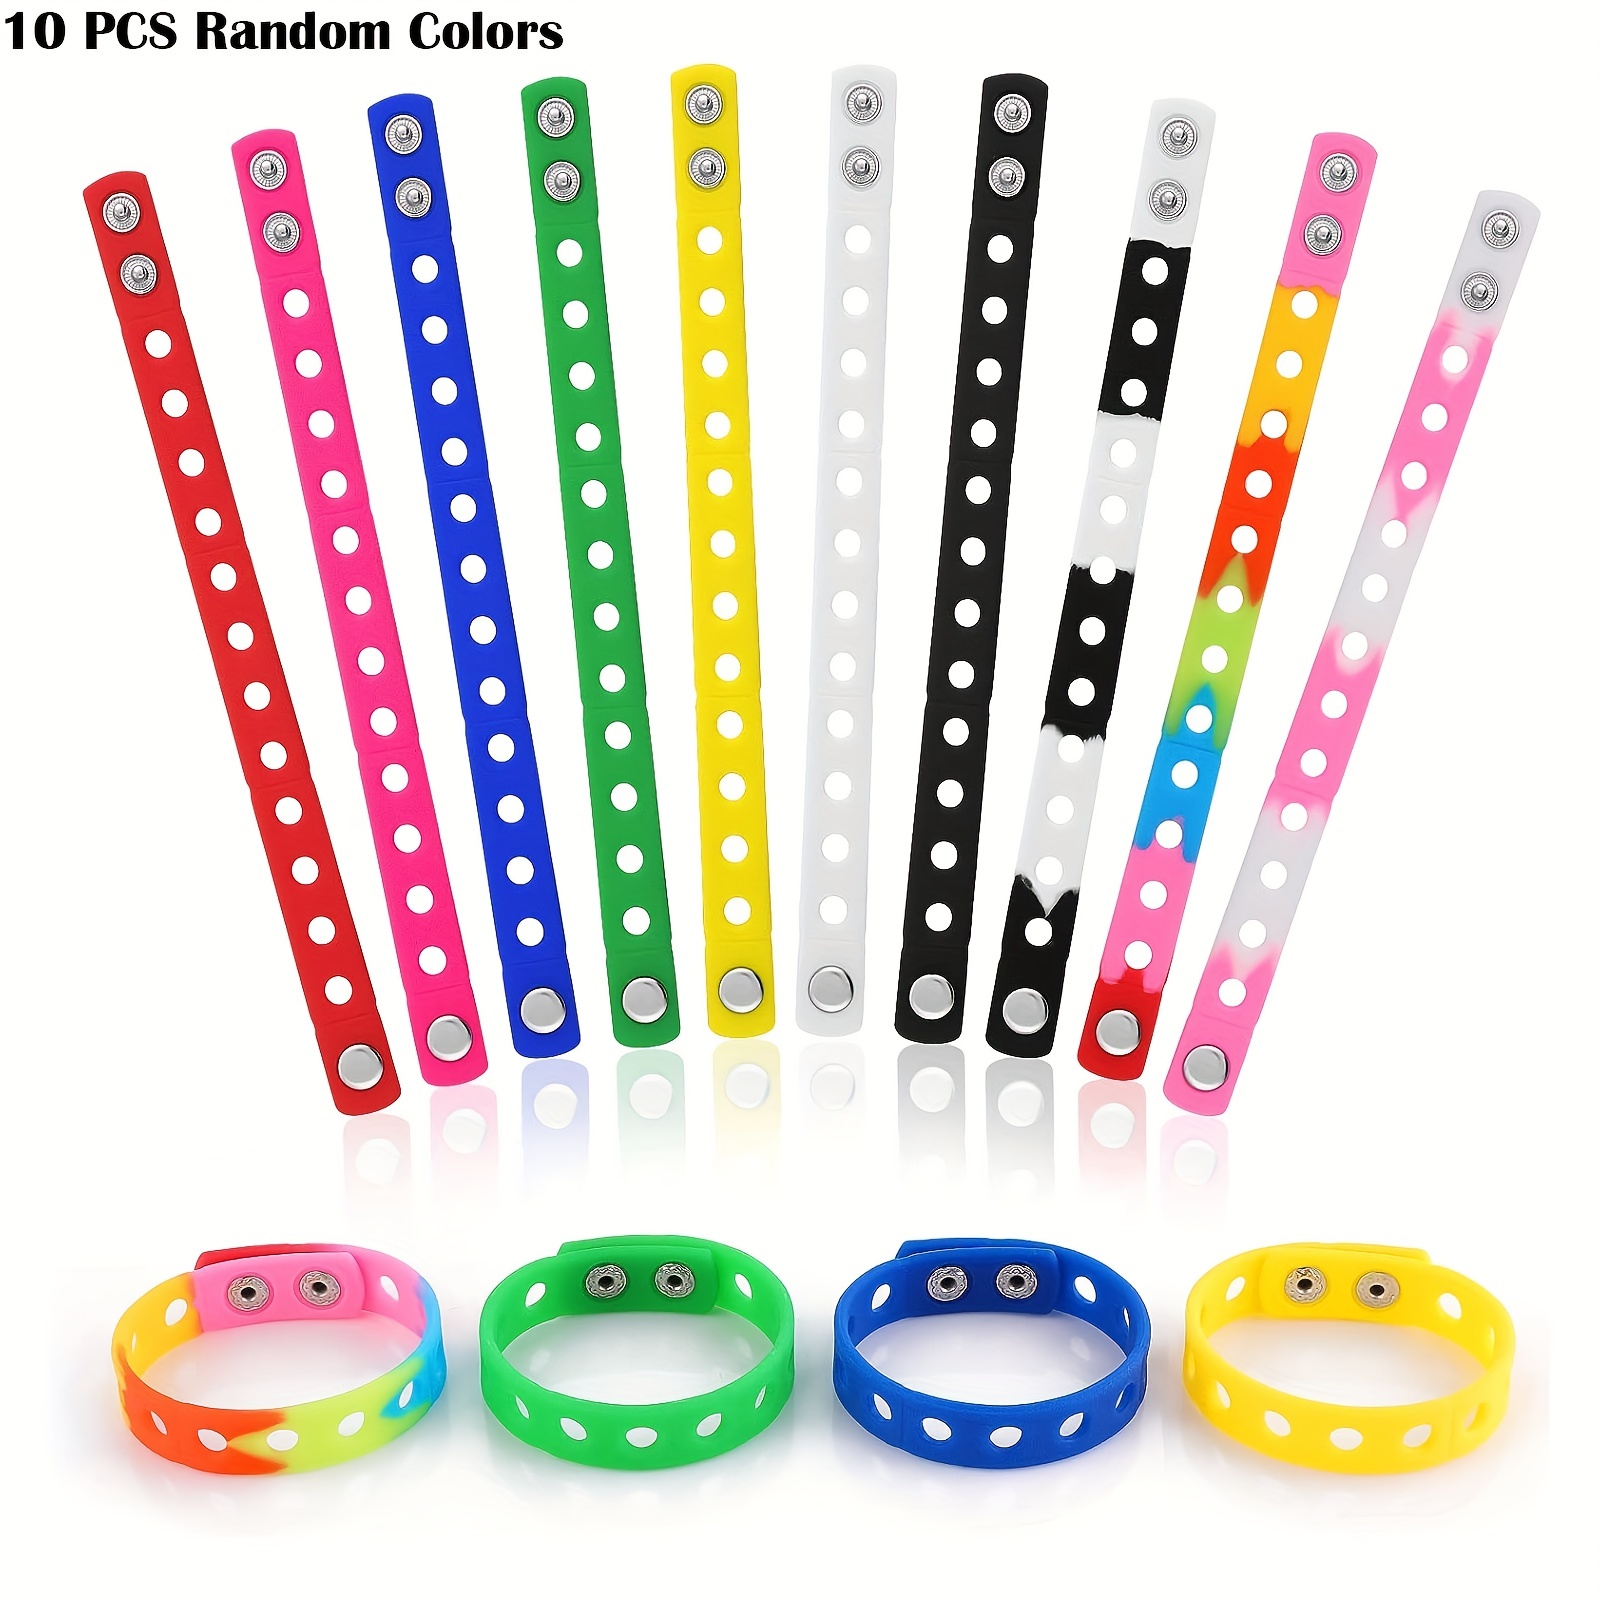 Silicone Bracelet - 48-Pack Blank Rubber Wristbands for Sports Teams, Games, Kid